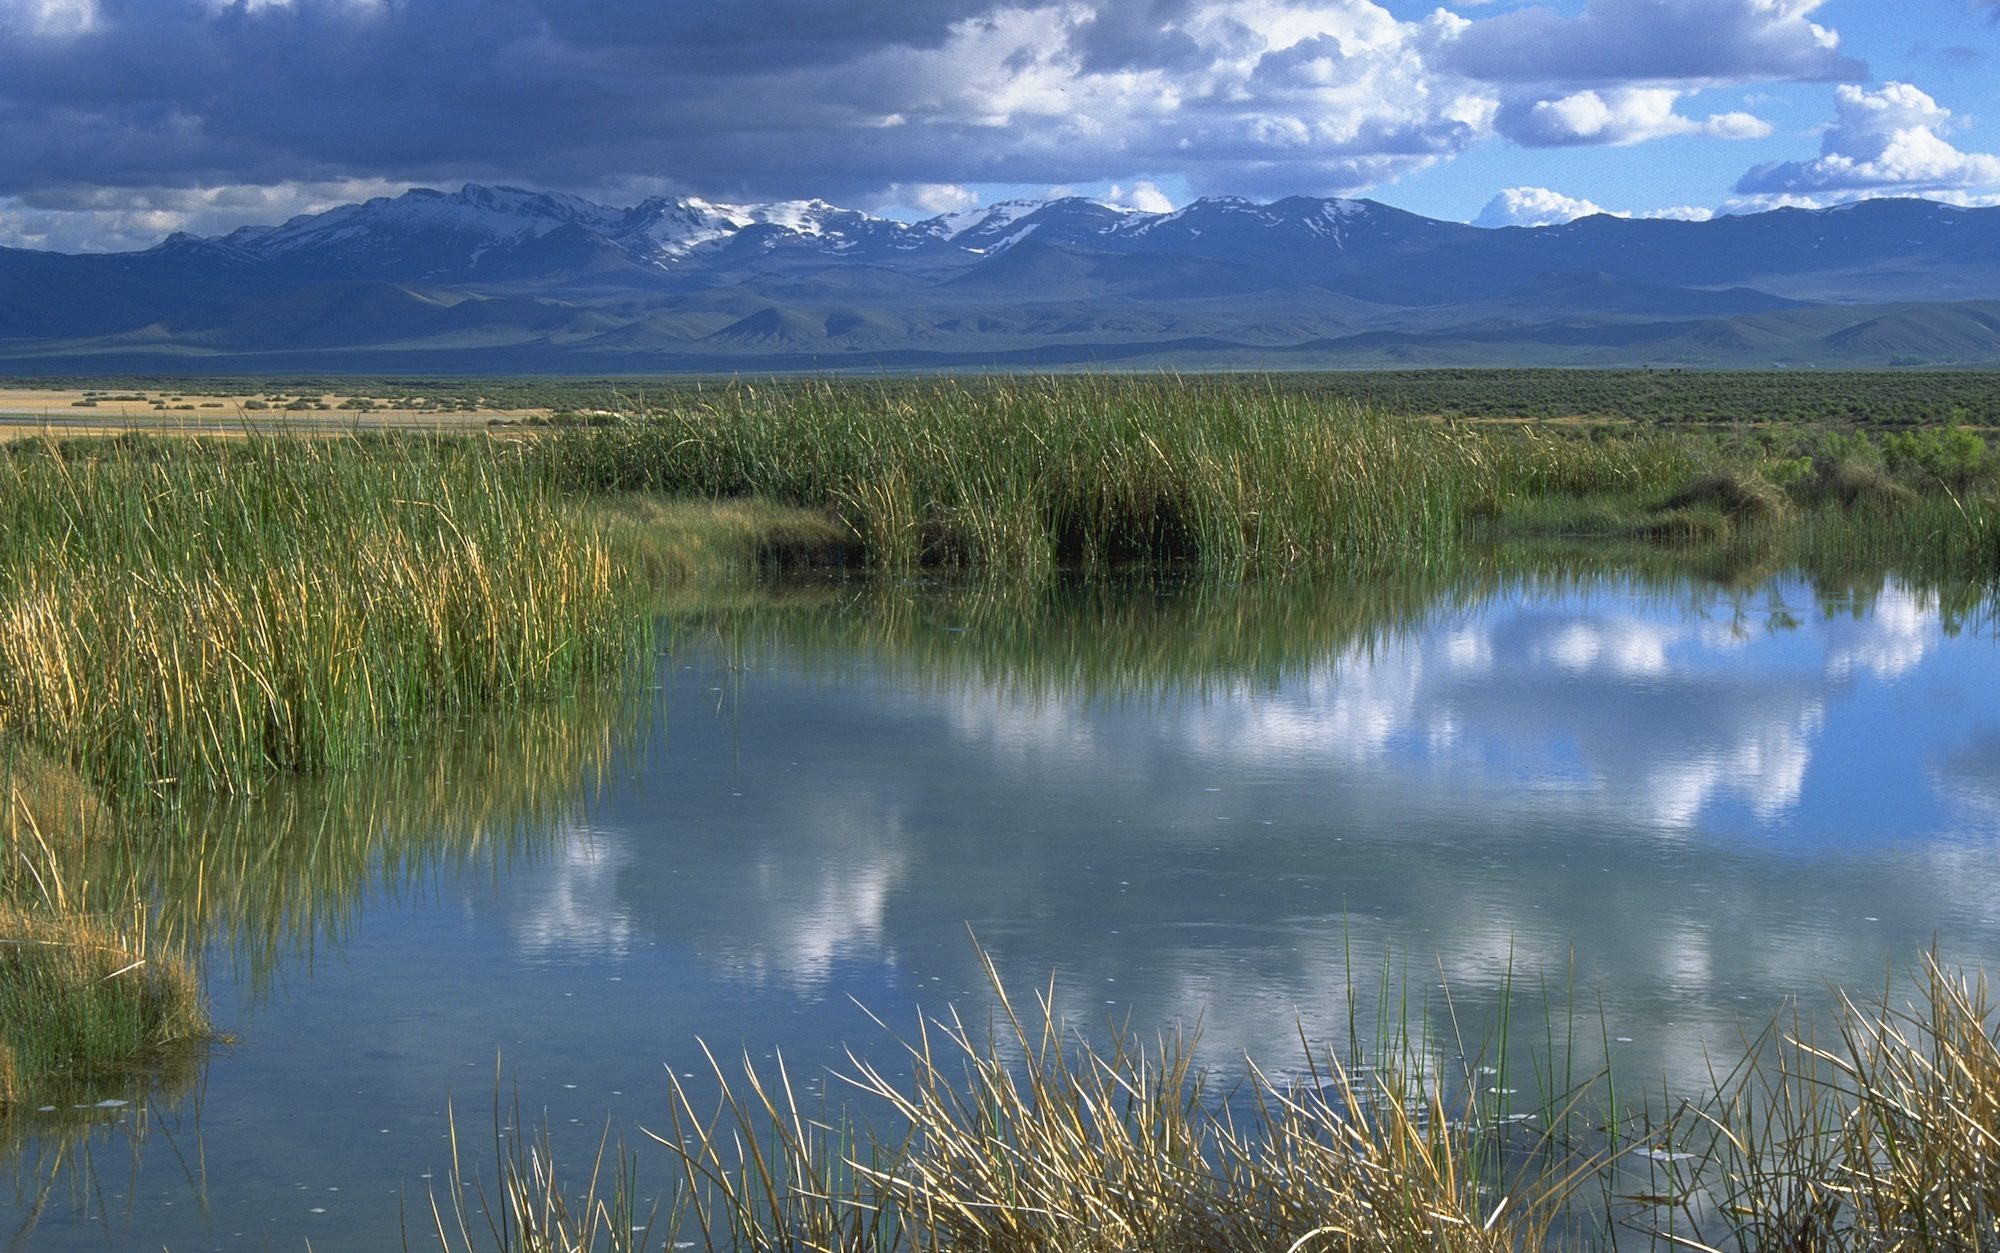 view of a pond surrounded by grass with mountains in the distance